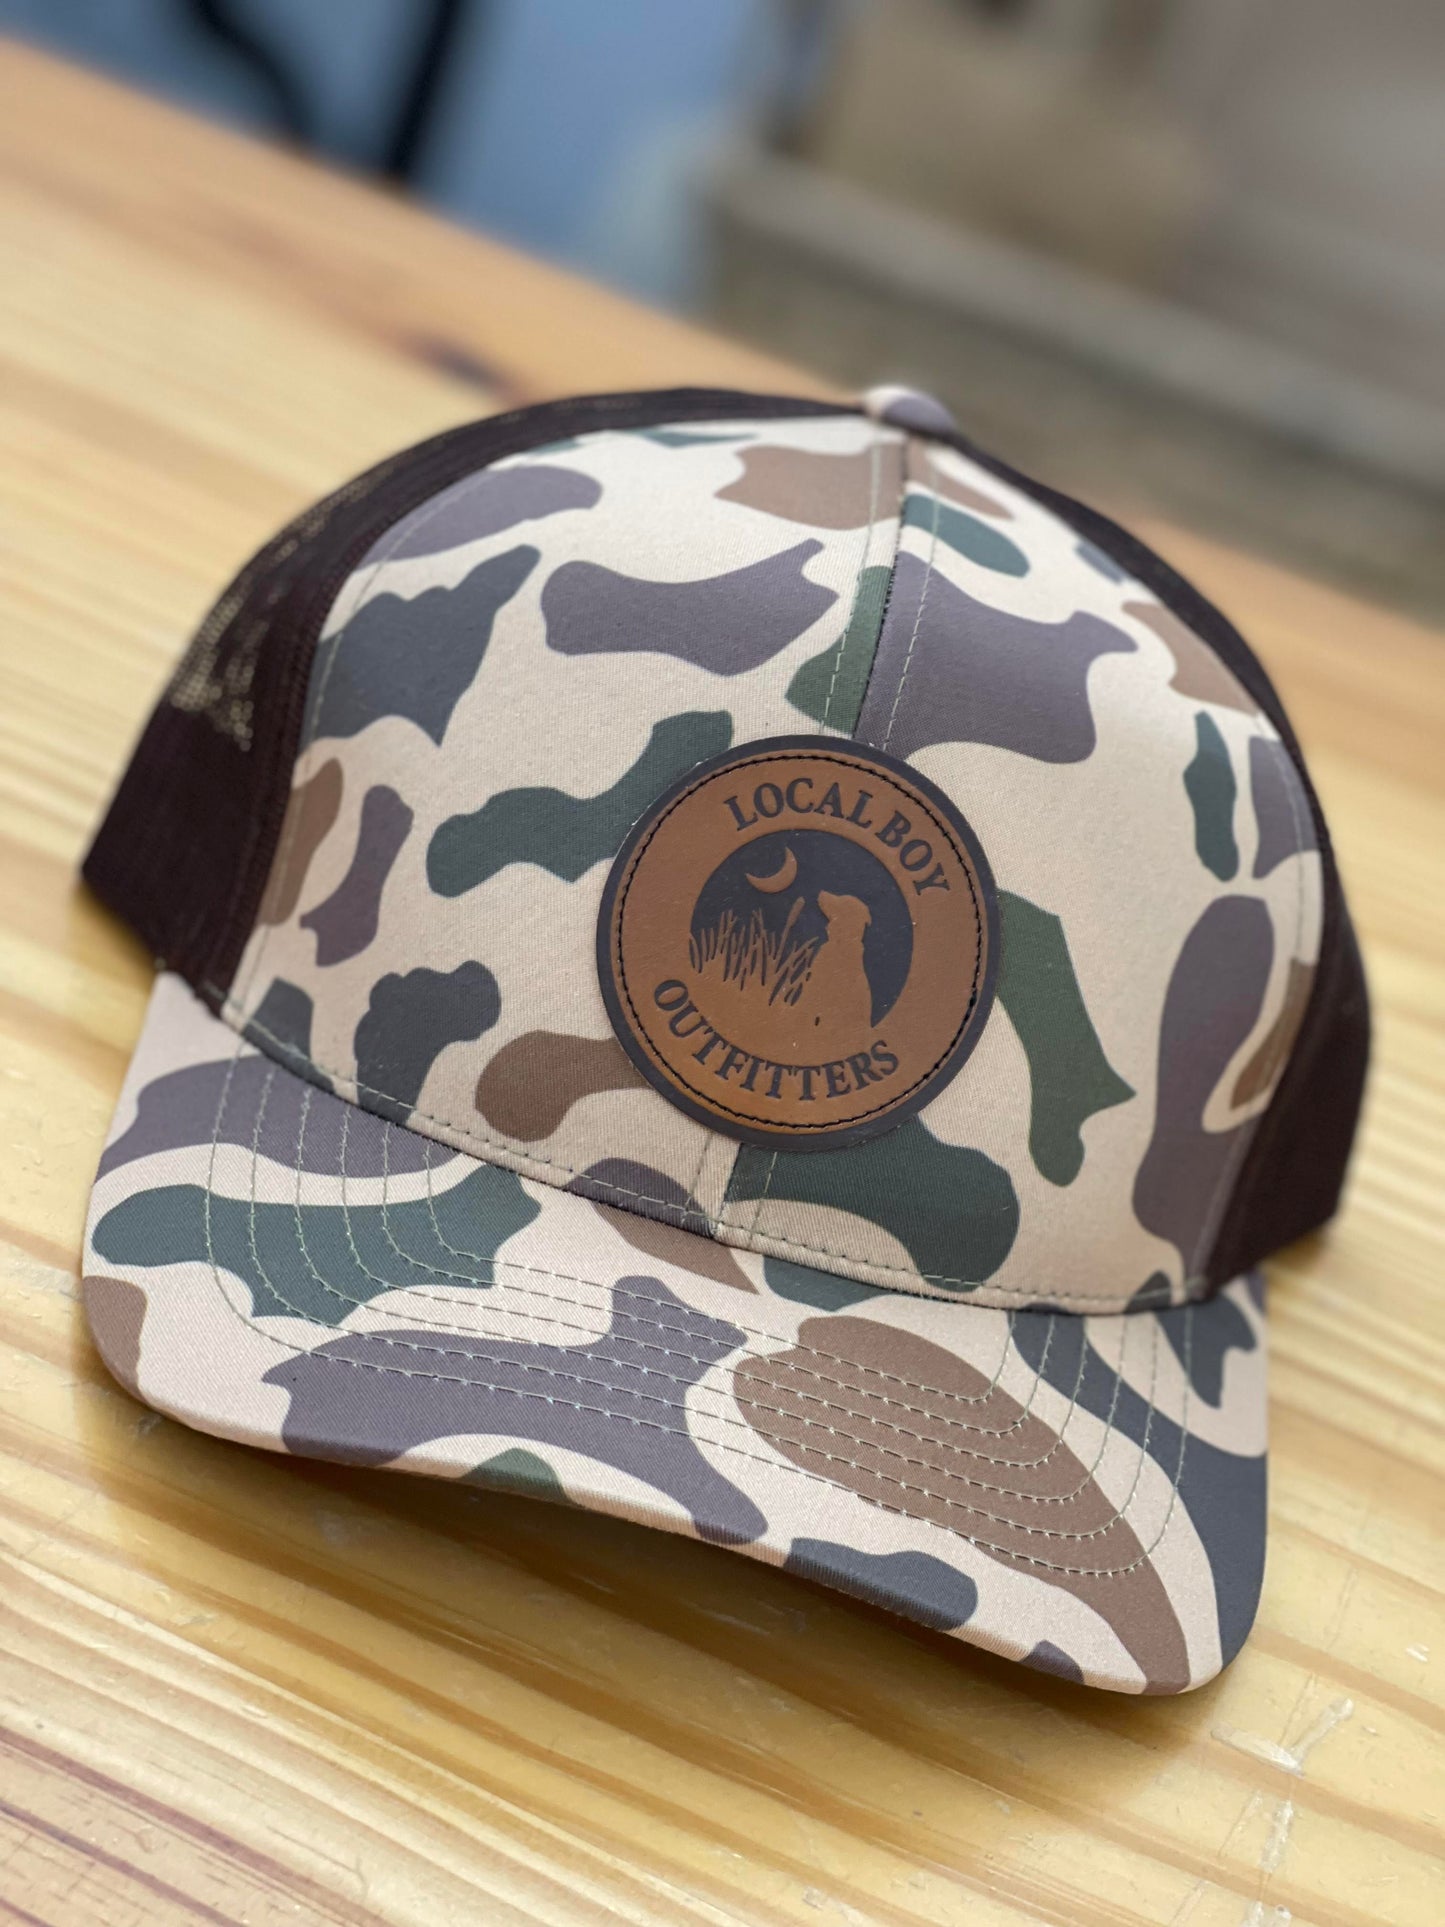 Local Boy Trucker Leather Patch Old School Camo